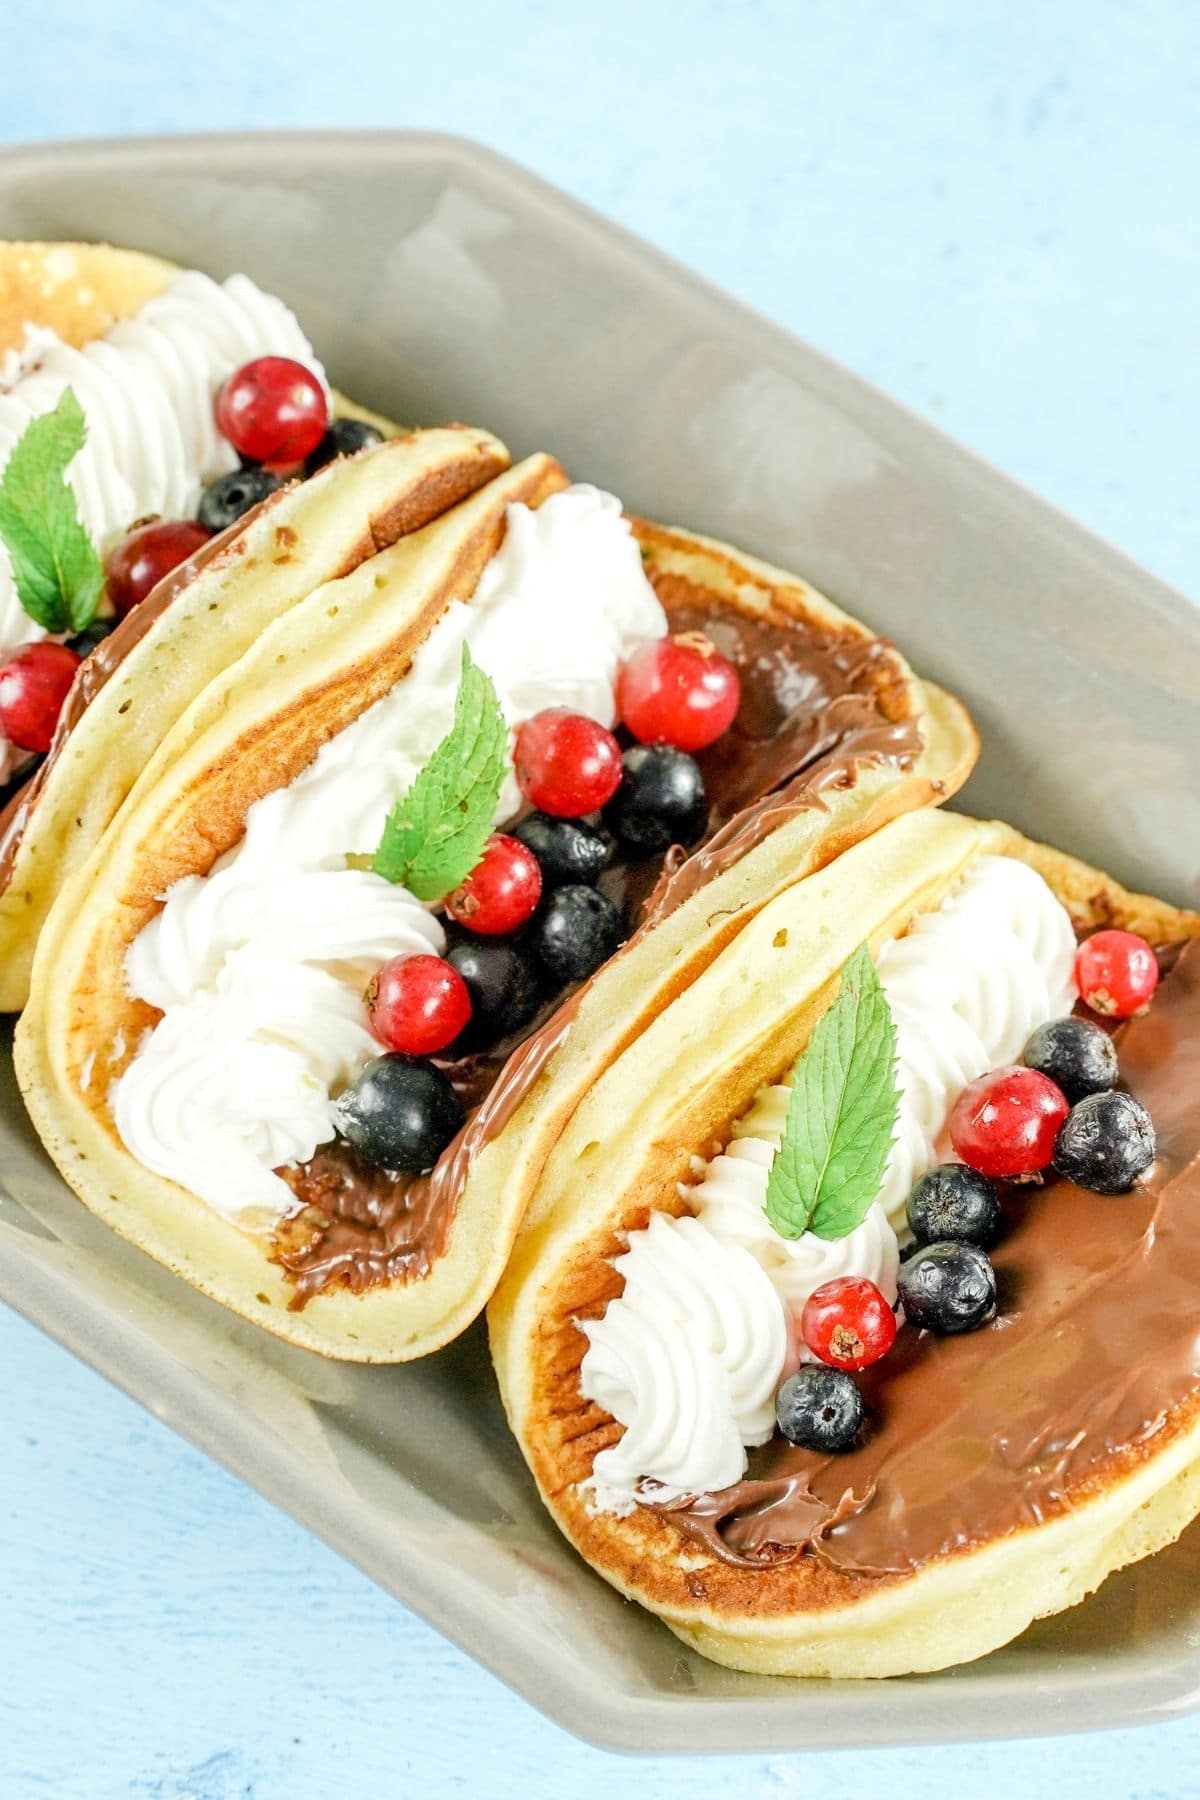 banana tacos stuffed with nutella berries and cream in gray platter on blue table